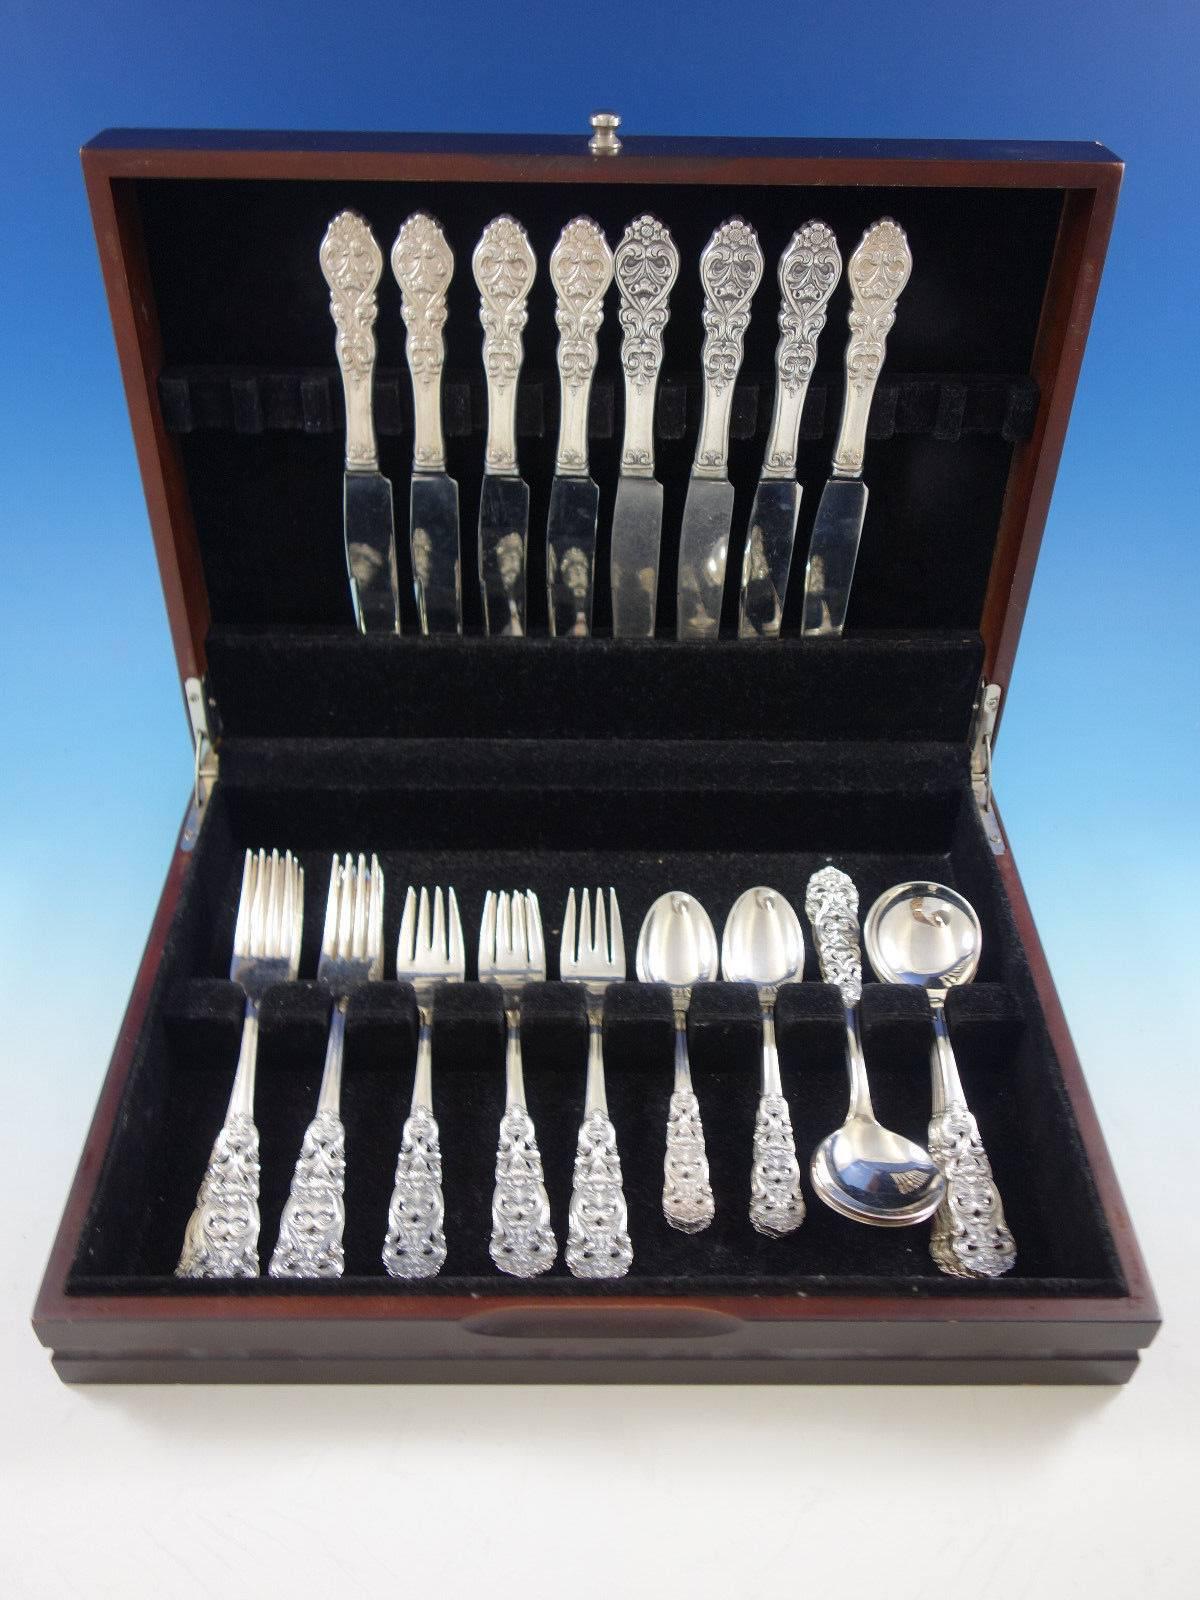 Valdres by Th. Marthinsen (Norway) sterling silver flatware set with ornate pierced handle, 40 pieces. This set includes: Eight dinner size knives, 9 1/2